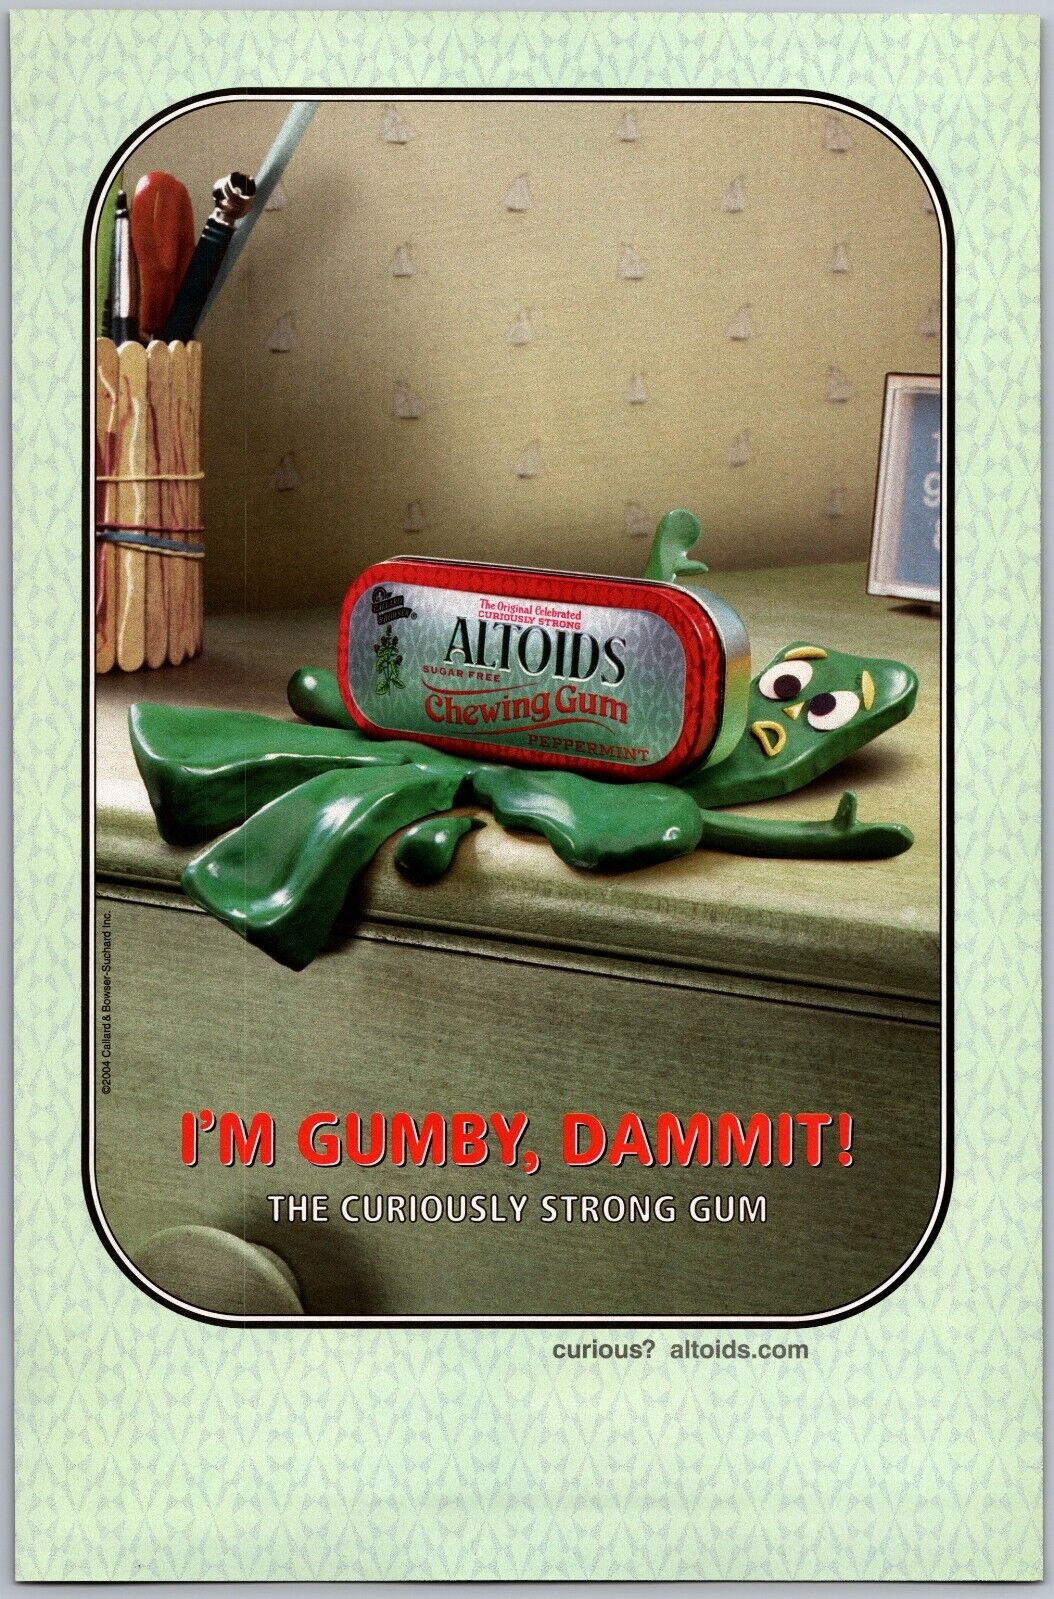 Altoids Chewing Gum Gumby Print Ad Poster Art PROMO Original Curiously Strong